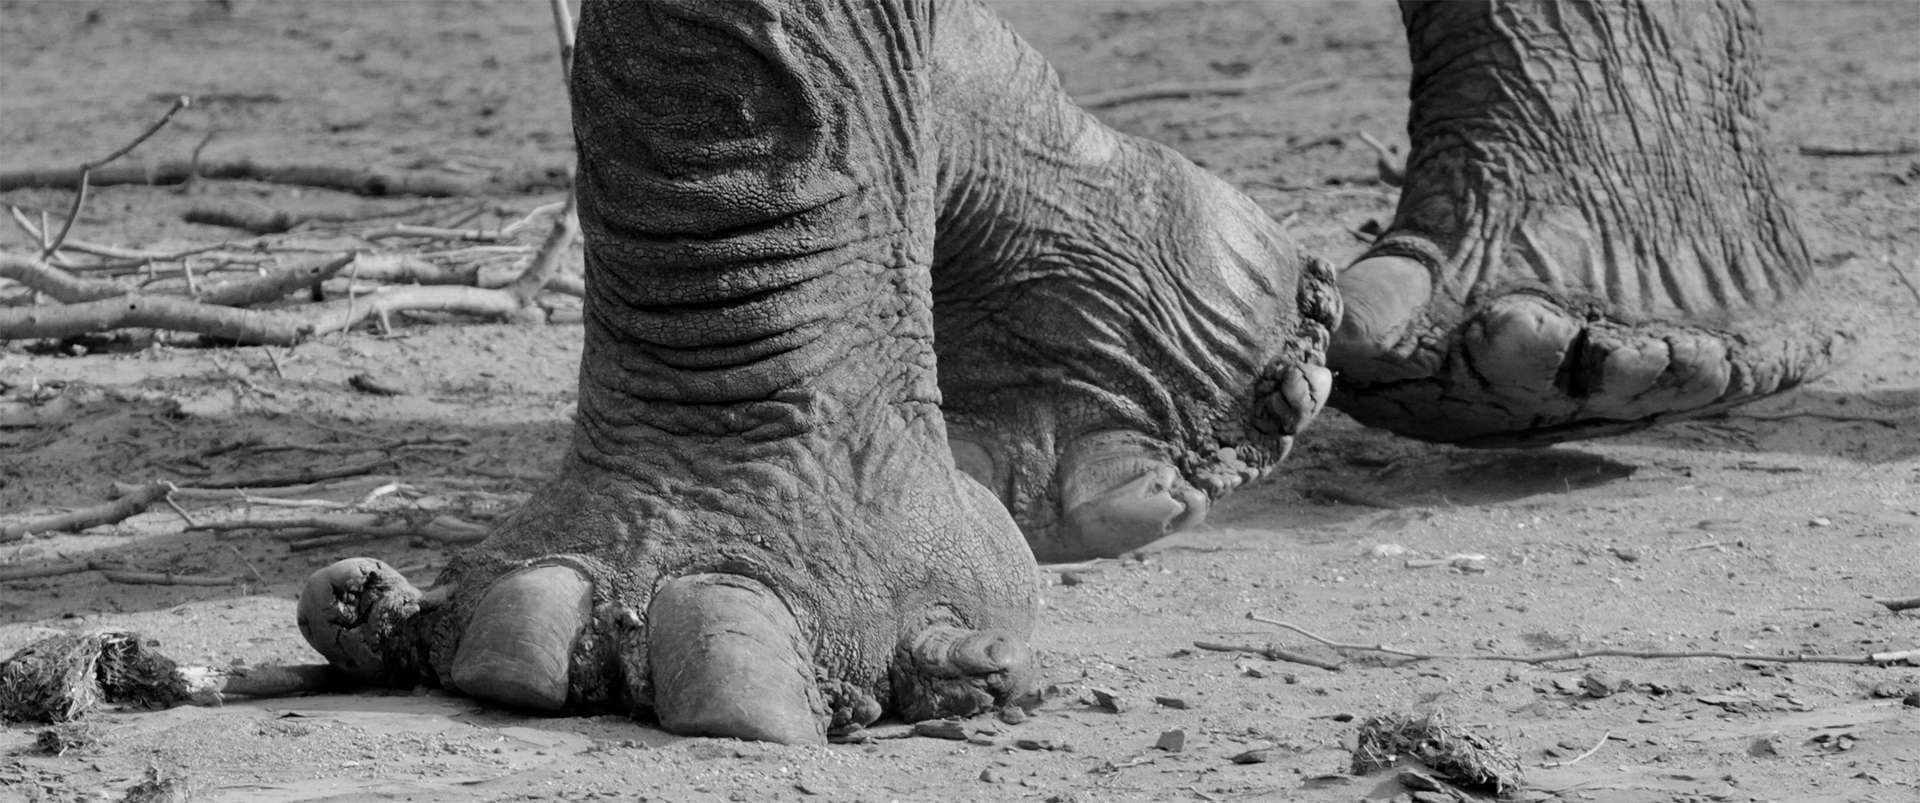 Black and white photo elephant legs, feet and toes